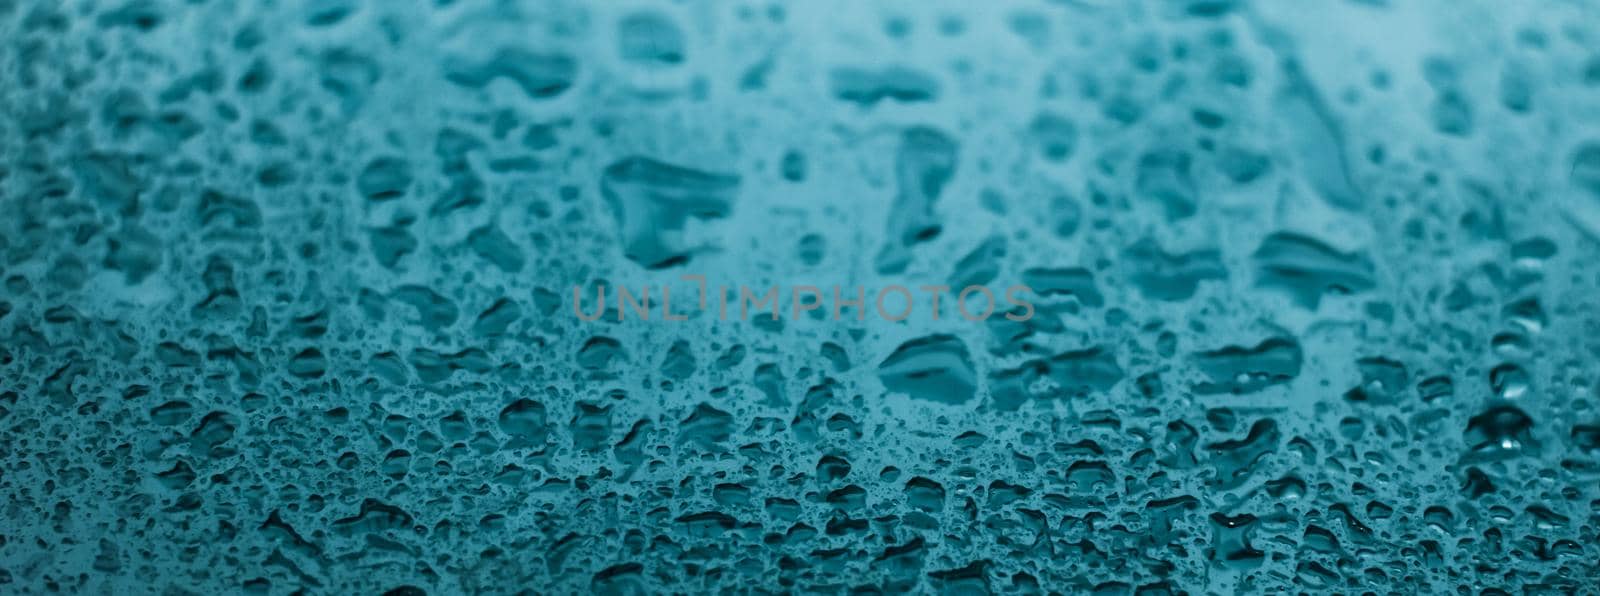 Liquid, wet and zen concept - Water texture abstract background, aqua drops on turquoise glass as science macro element, rainy weather and nature surface art backdrop for environmental brand design